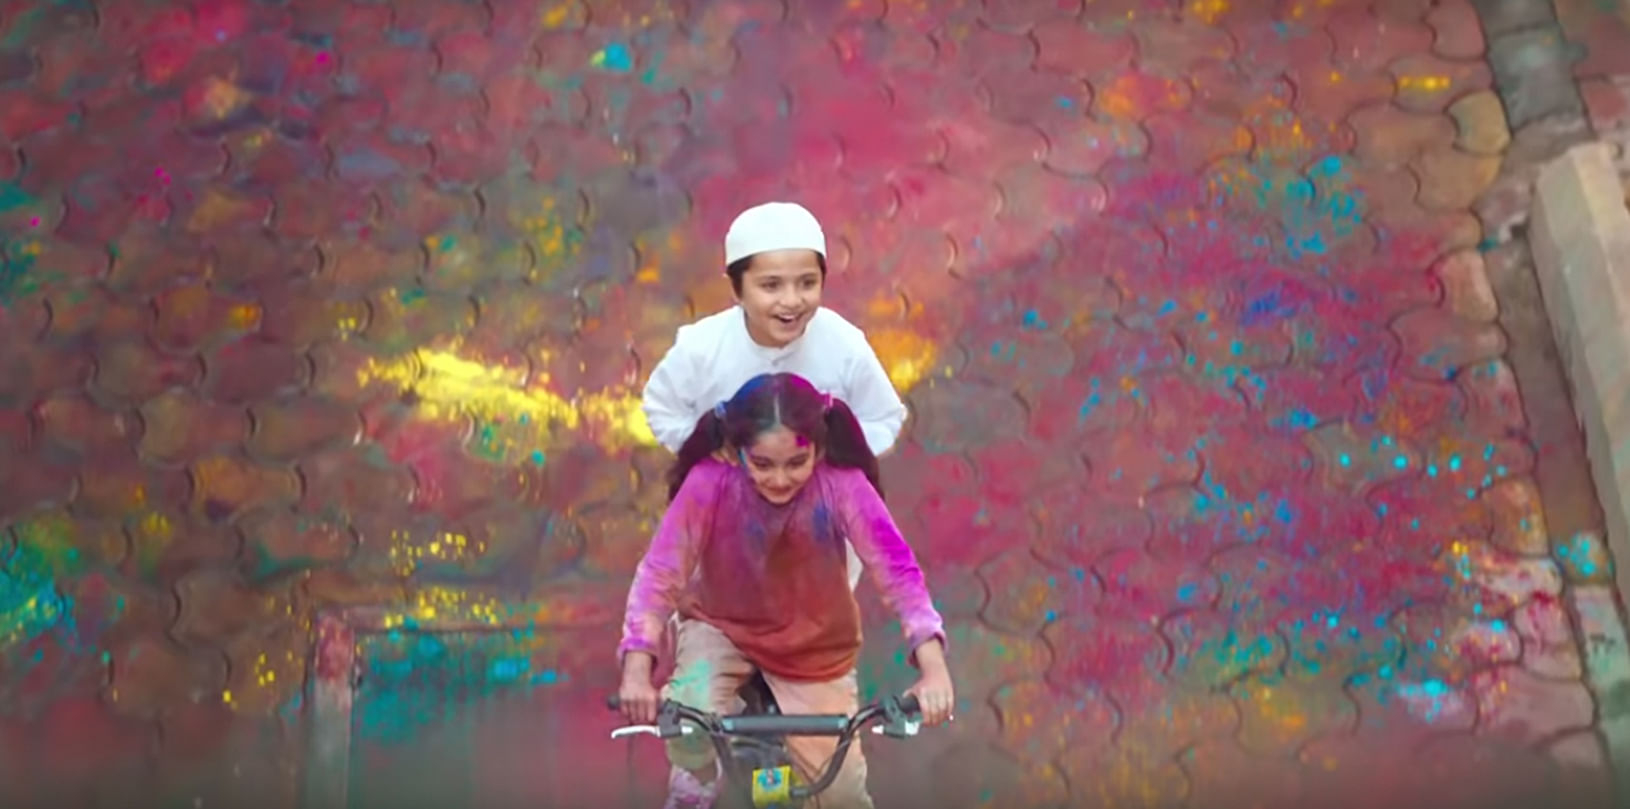 The ad features a young Hindu girl getting drenched in Holi colours to help her Muslim friend reach the mosque for his prayers.